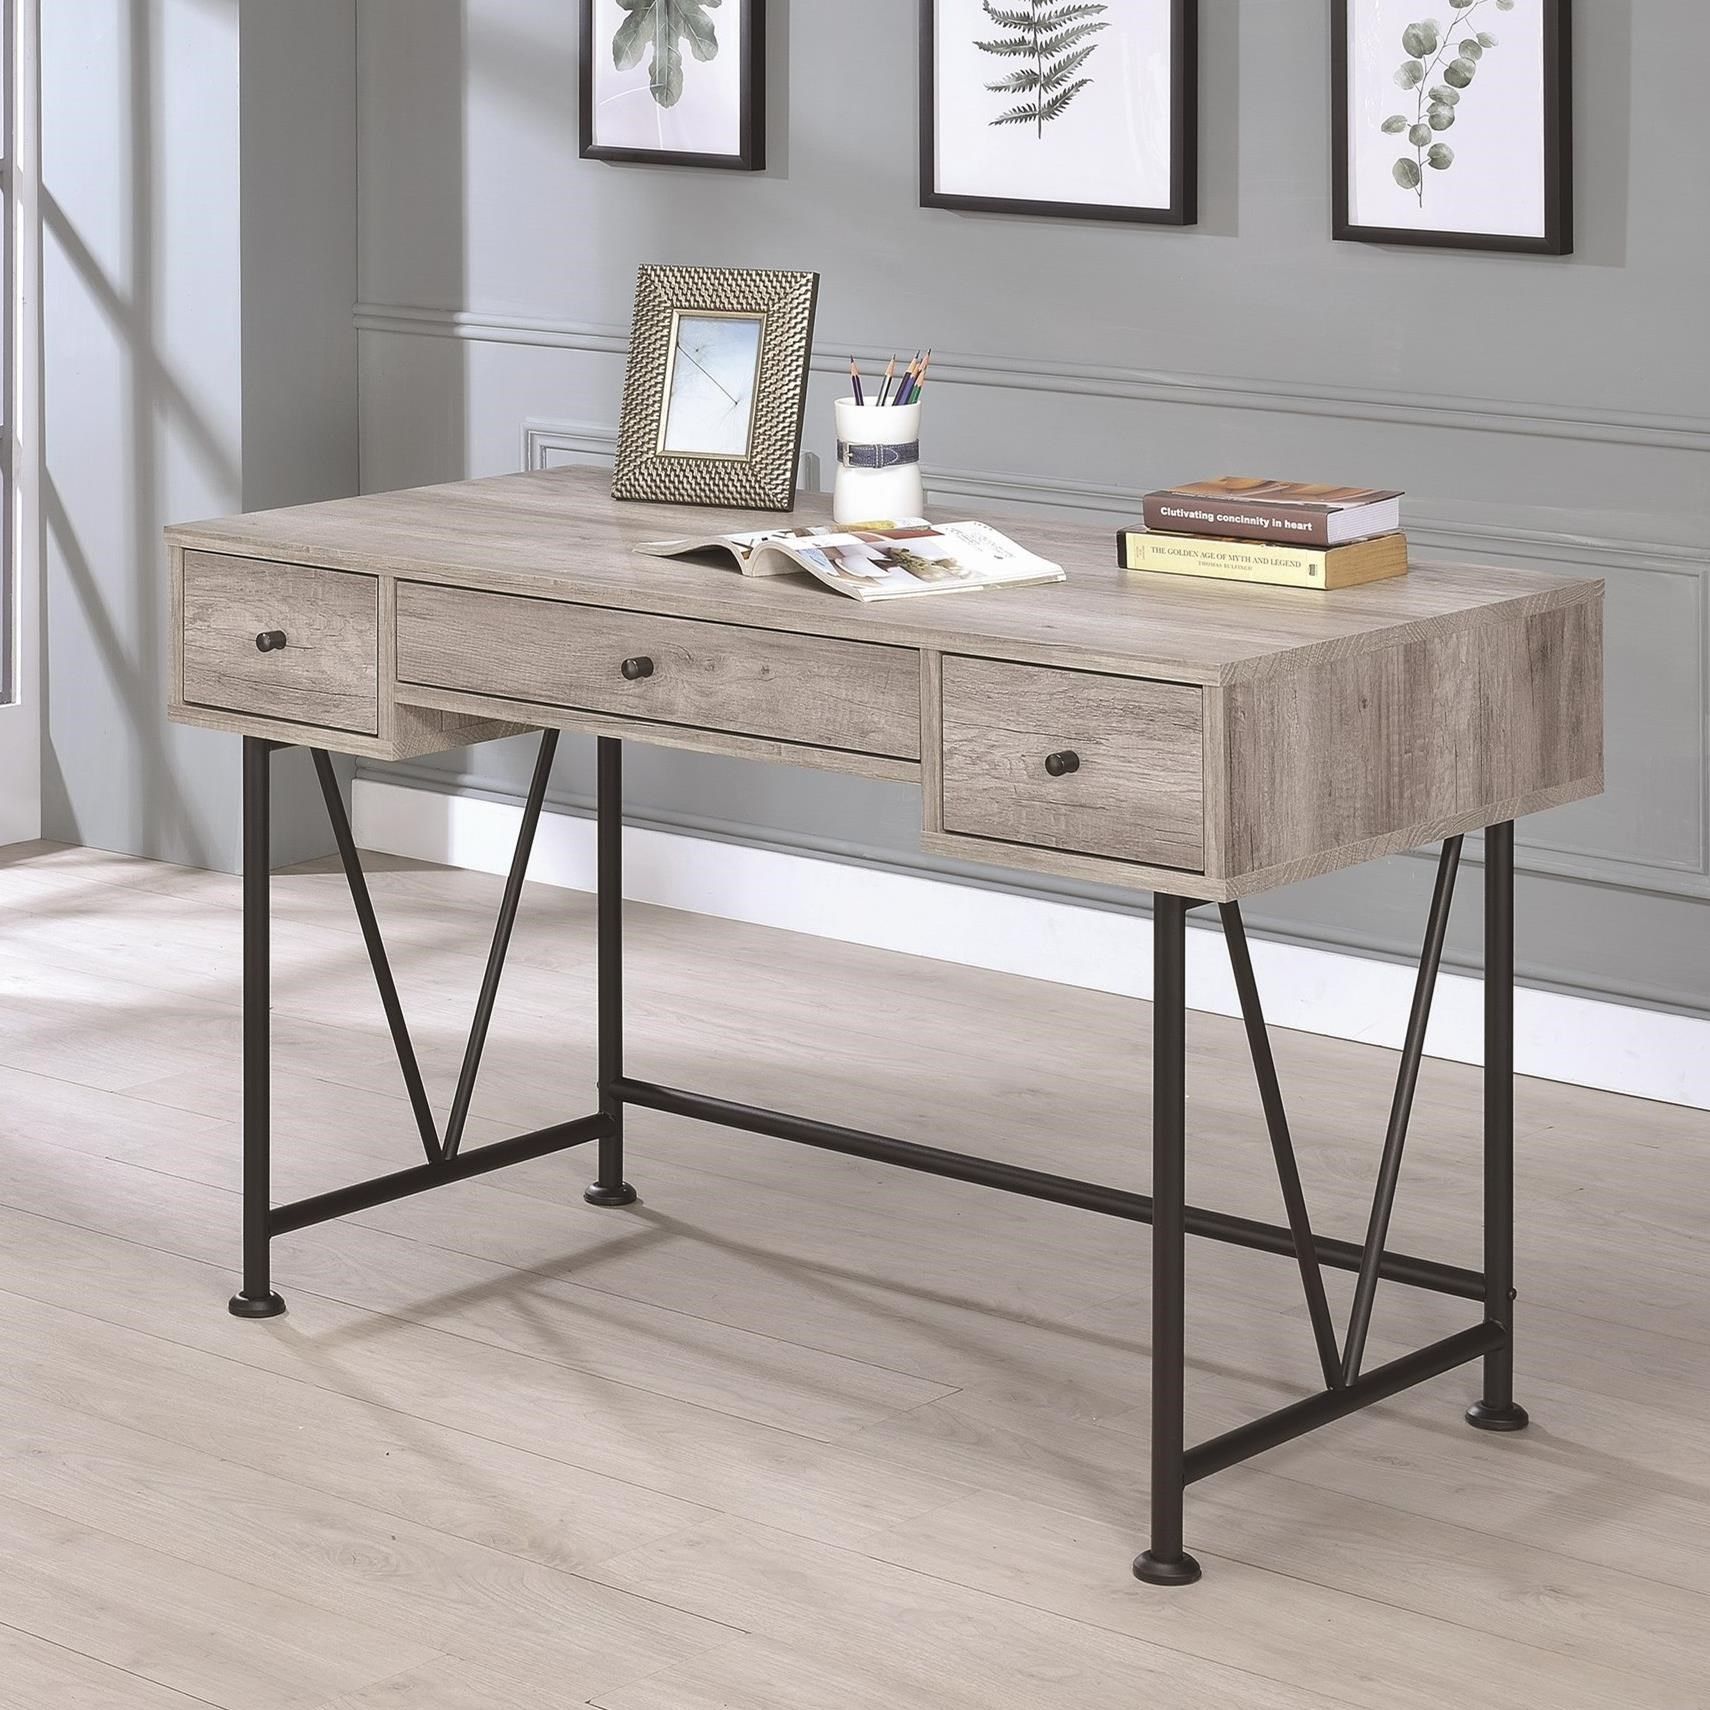 Coaster Guthrie Industrial Style Writing Desk With 3 Drawers | Value Regarding Smoke Gray Computer Writing Desks (View 4 of 15)